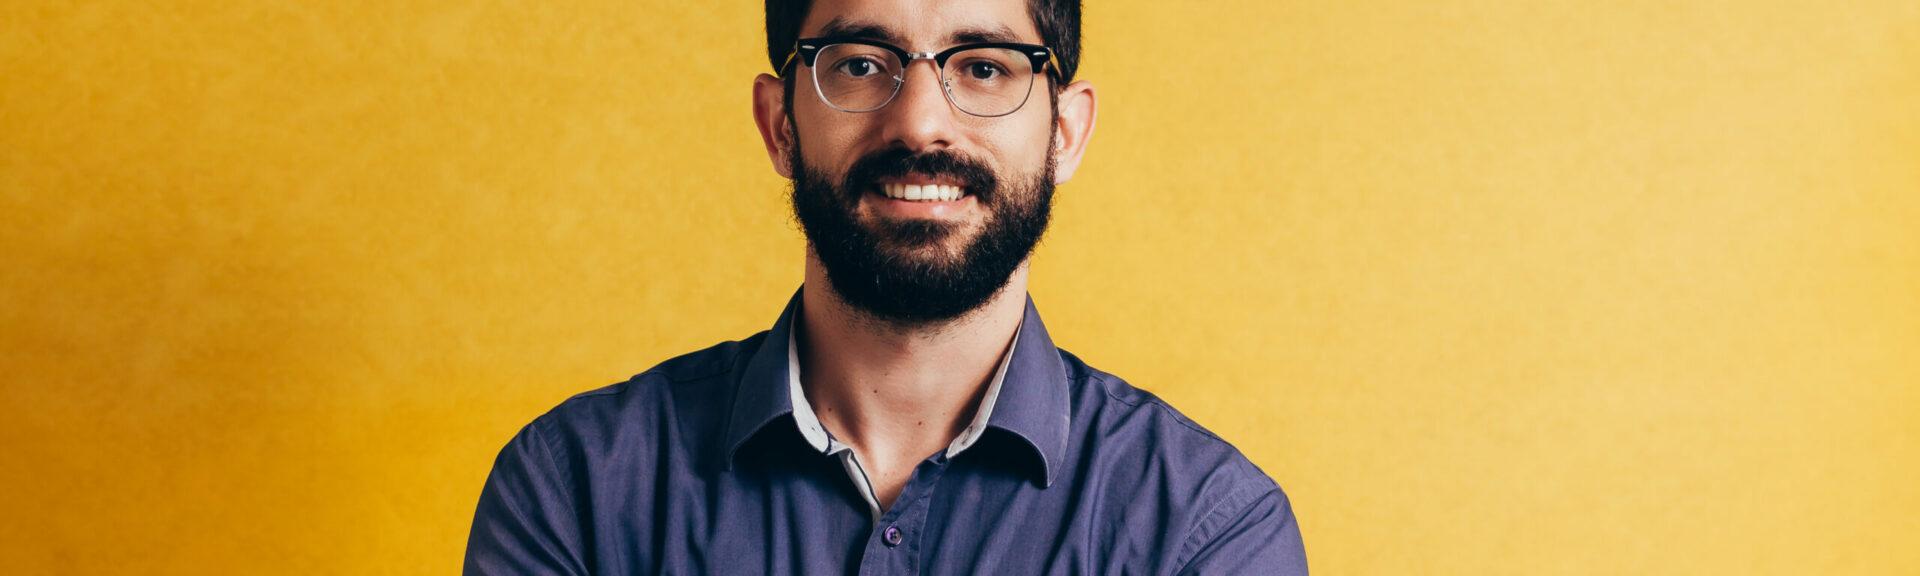 Portrait of a smiling bearded man in eyeglasses looking at camera isolated over yellow background